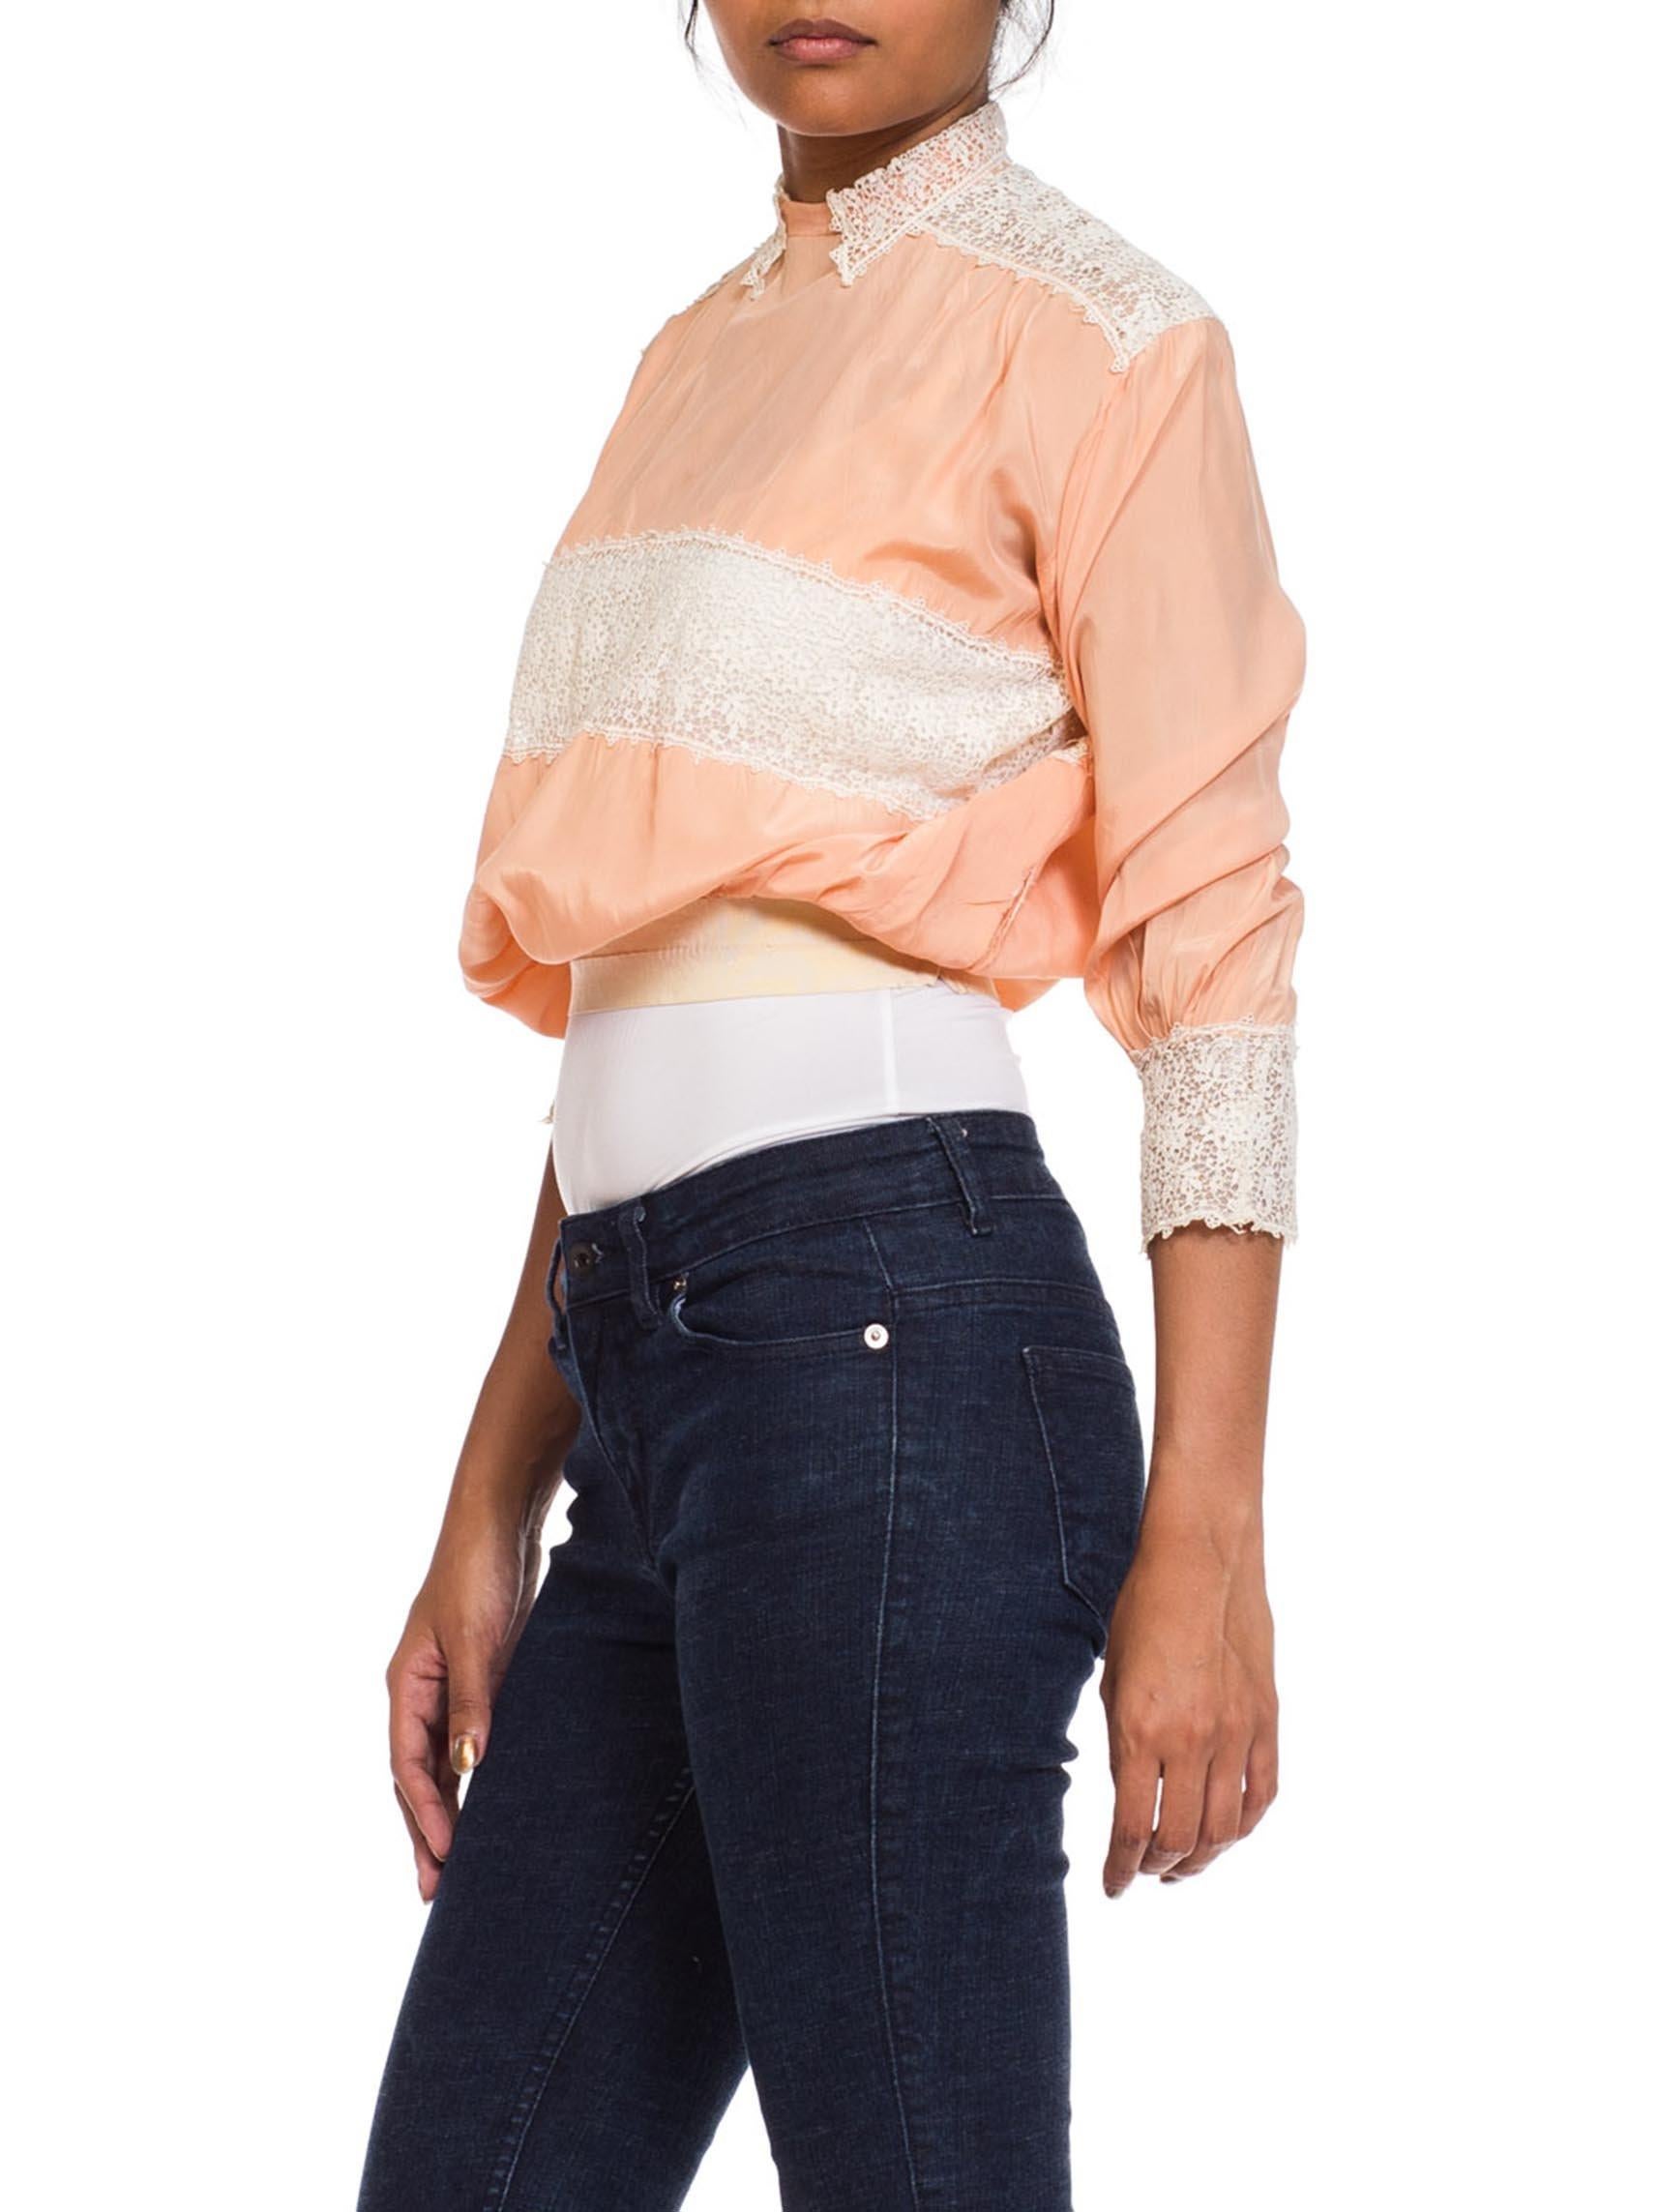 Edwardian Peach Rayon & Lace Entirely Hand Stitched Blouse In Excellent Condition For Sale In New York, NY